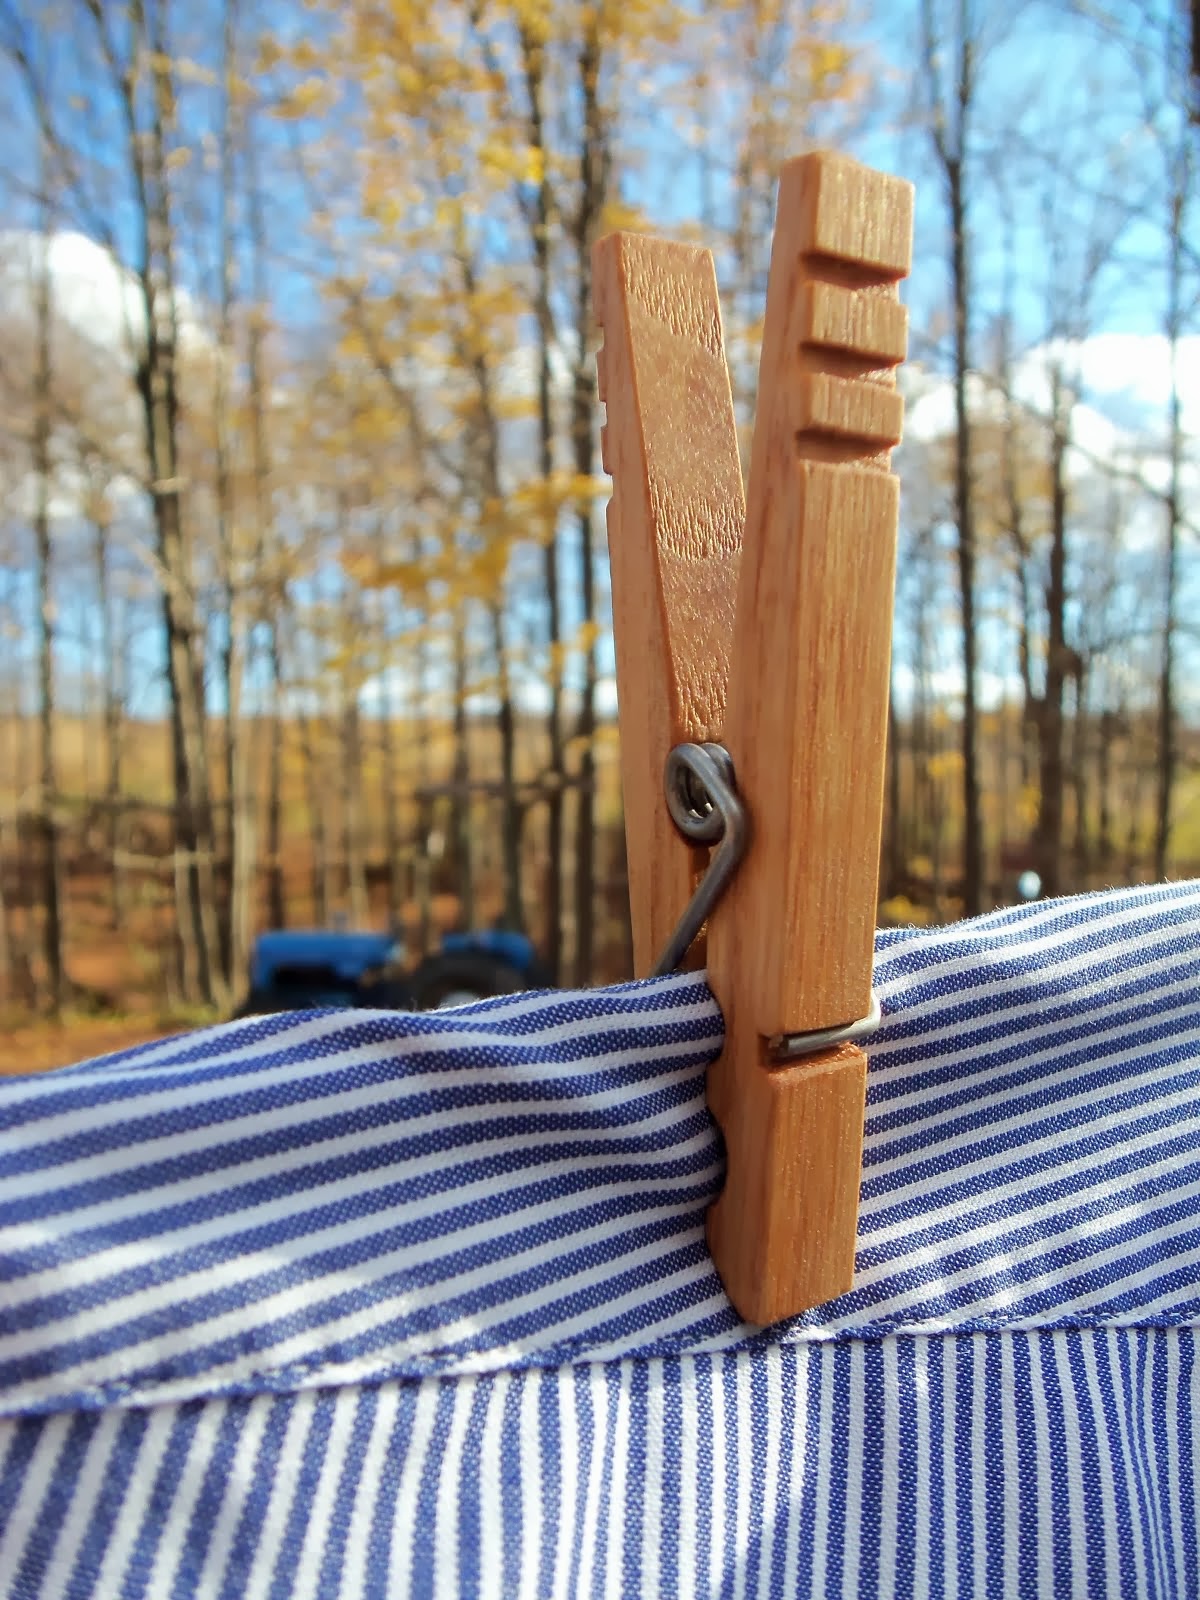 How to Properly Use a Classic American Clothespin